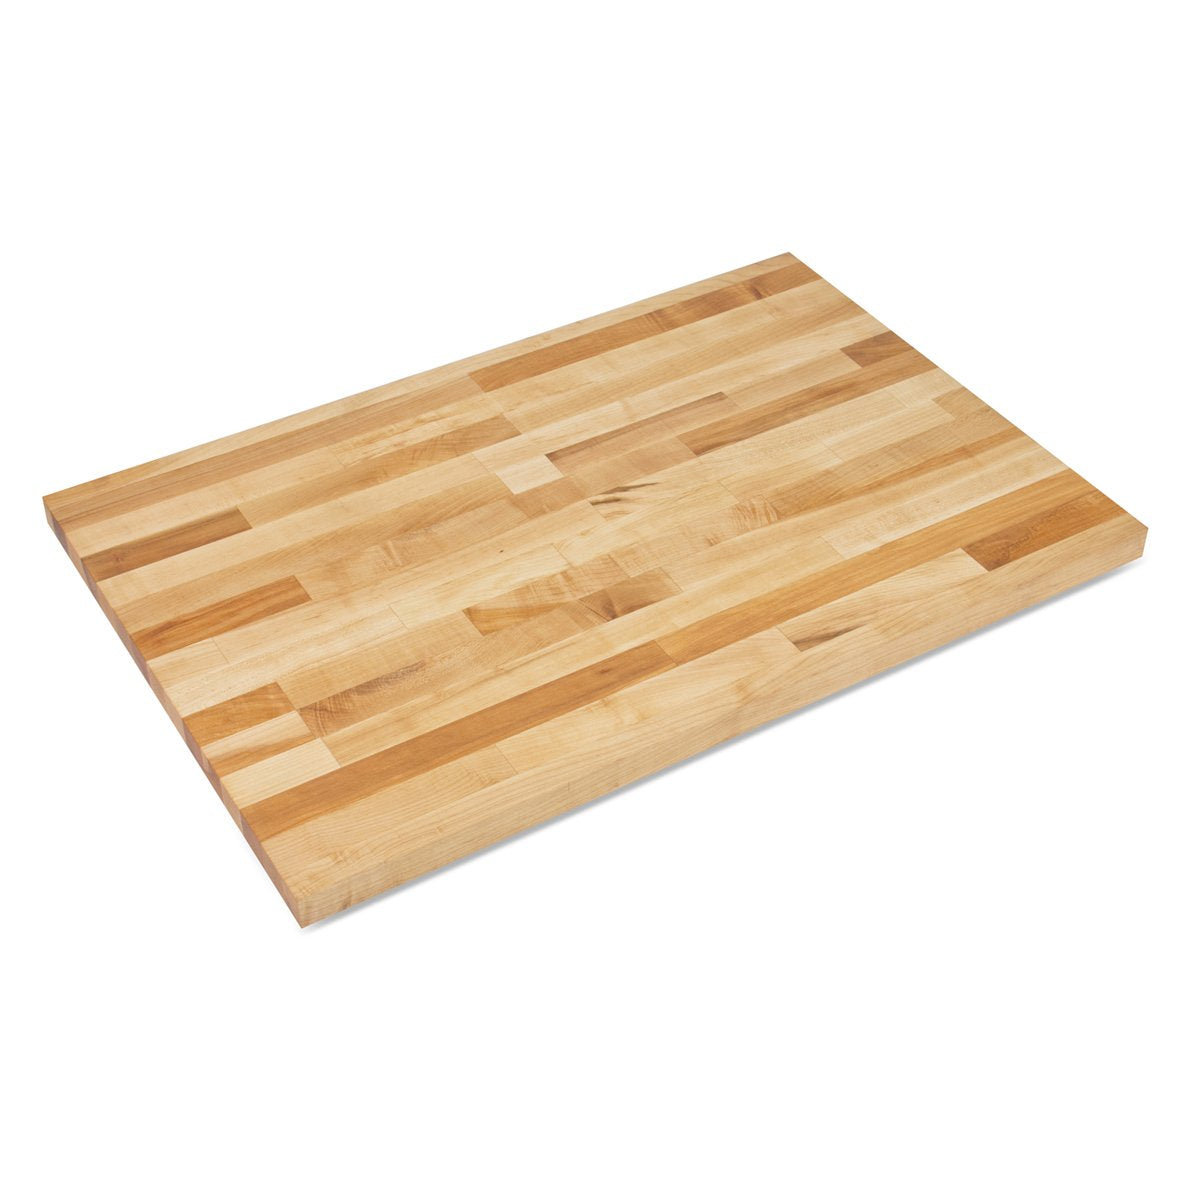 John Boos KCT-BL8427-O Blended Maple Butcher Block Countertop - 1-1/2" Thick, 84"L x 27"W, Natural Oil Finish